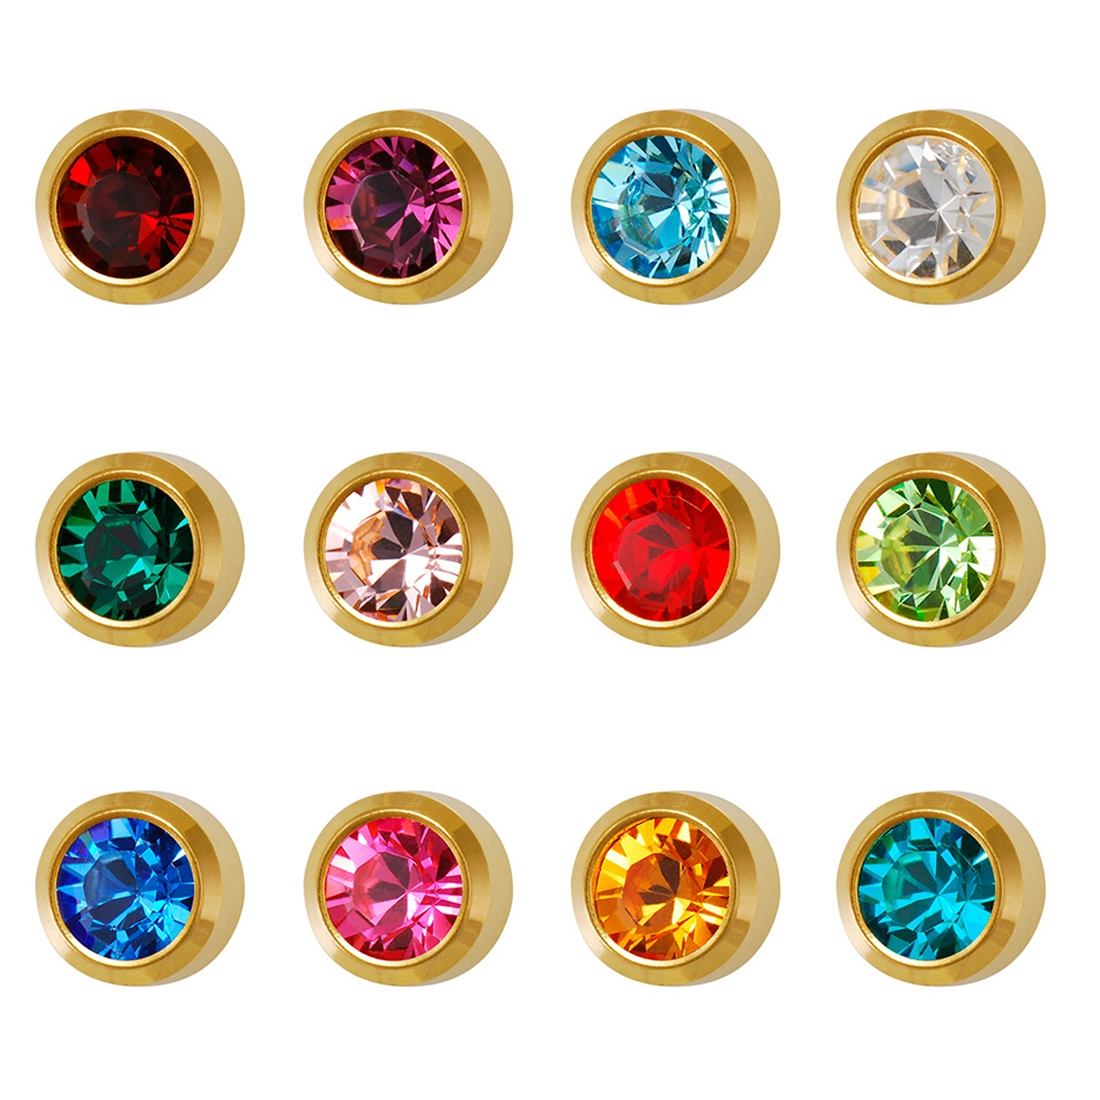 2MM Bezel - Assorted (Multi-color) | January - December Birthstone | 24K Pure Gold Plated Piercing Earrings | Studex Universal Machine (12 Pair Kit)